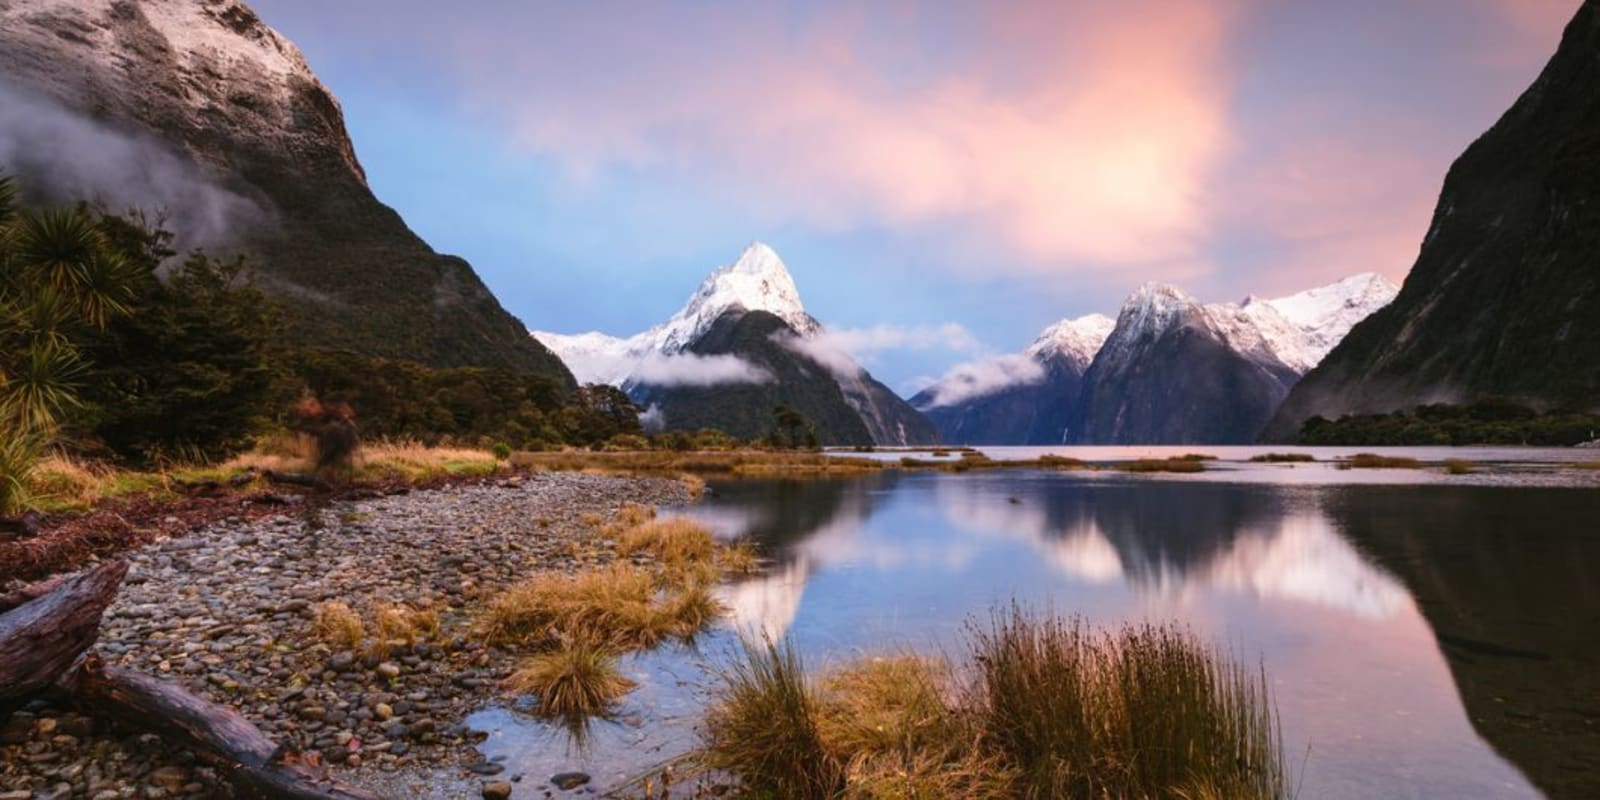 Milford Sound from the edge of the water